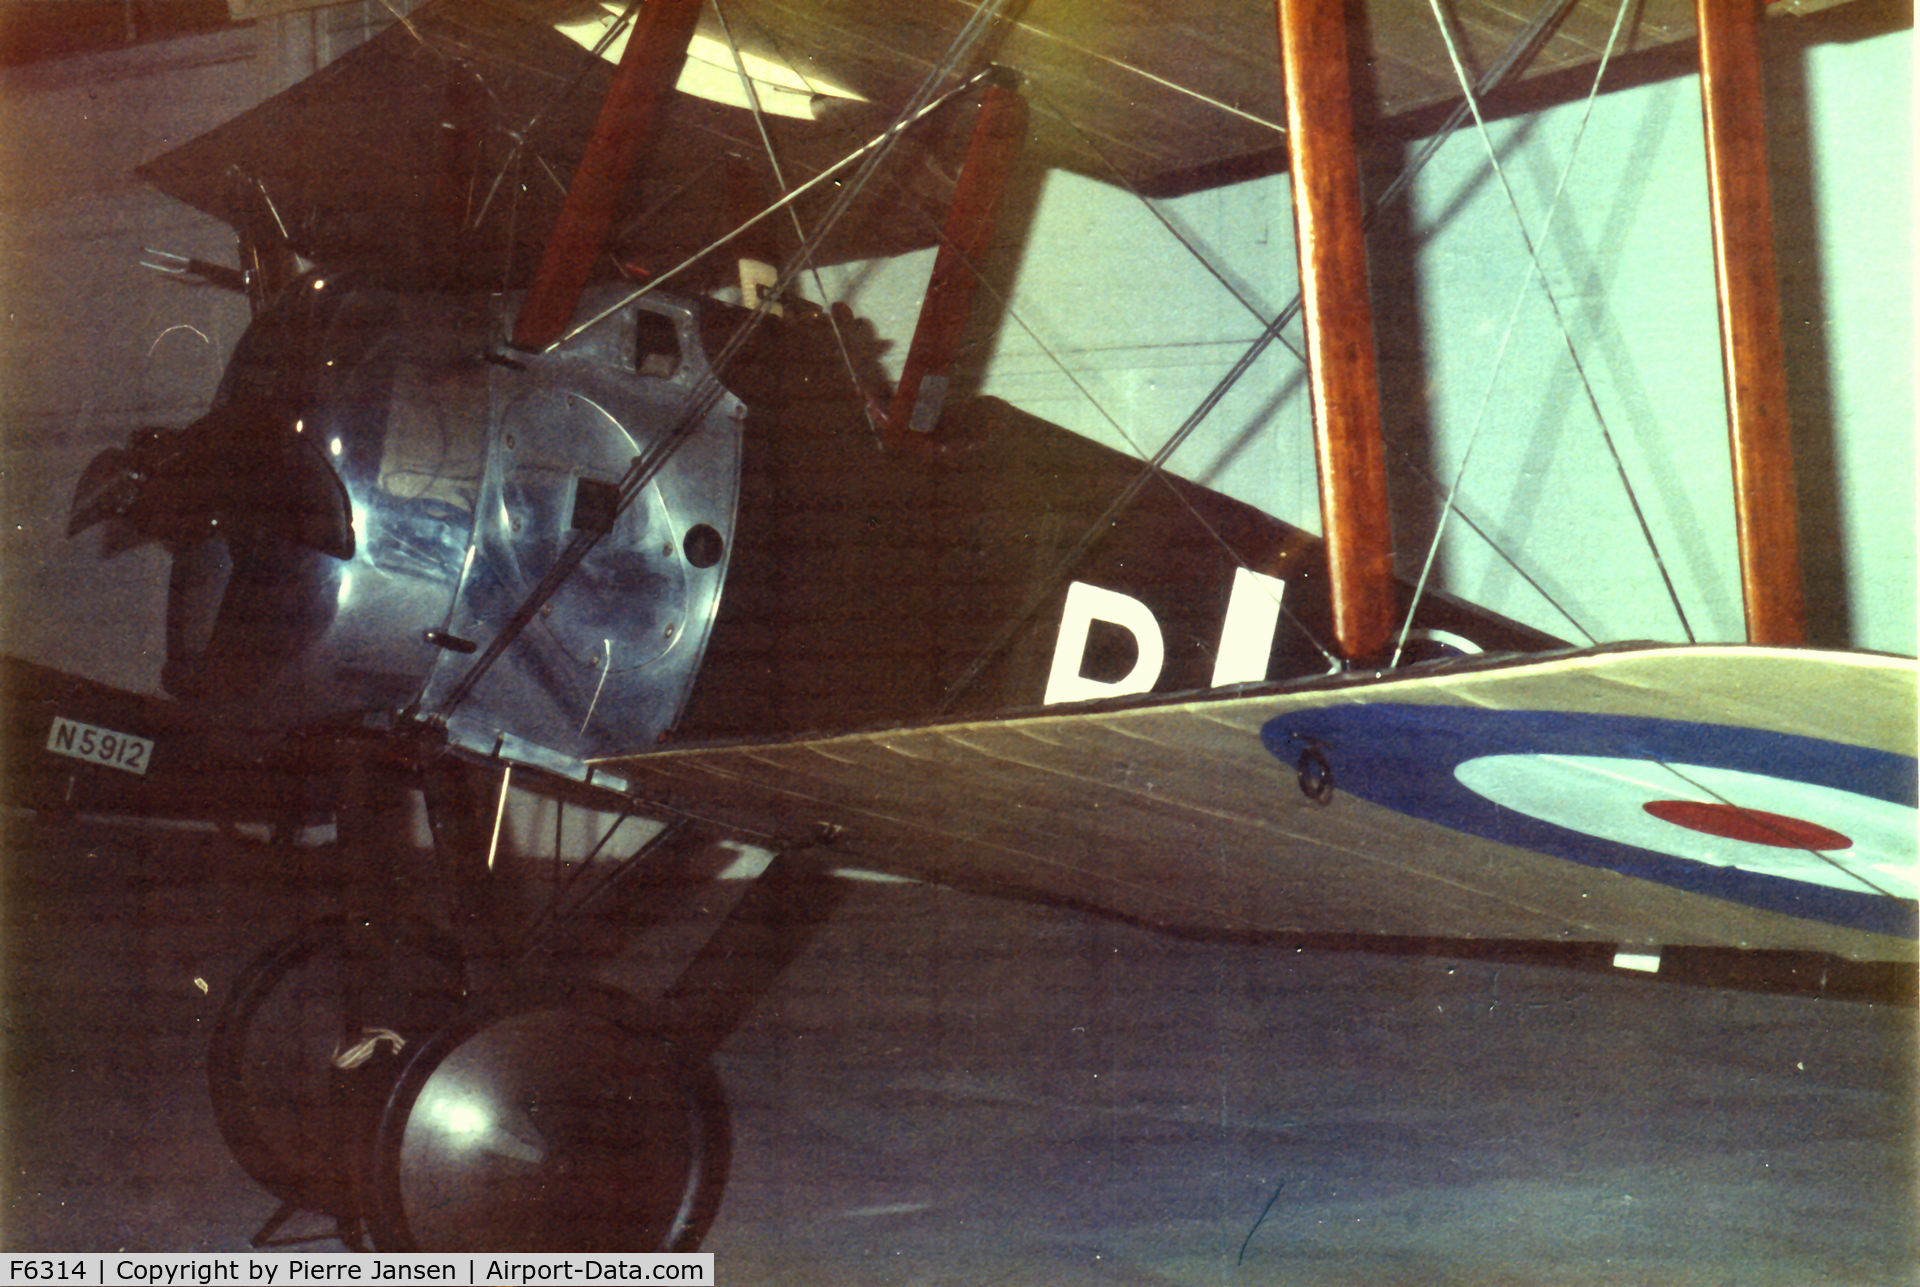 F6314, Sopwith F.1 Camel C/N Not found F6314, Taken in 1973 when the plane was still grounded